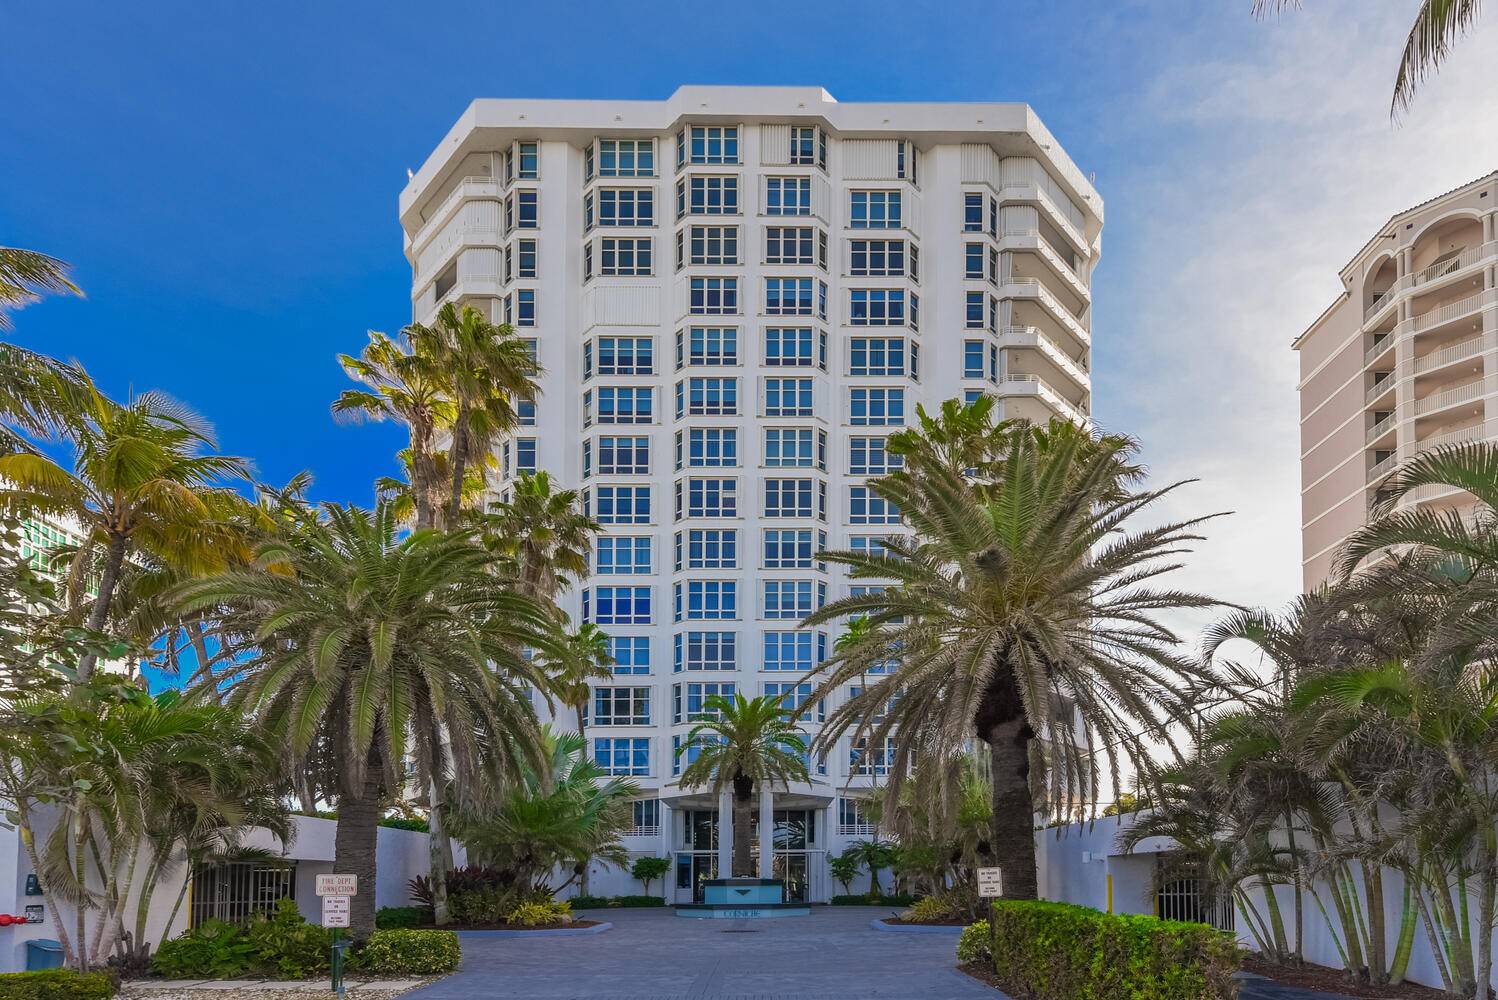 Situated directly on the ocean's edge, this stunning fully furnished, turn key ready condo offers a near total renovation that's truly a coastal paradise.